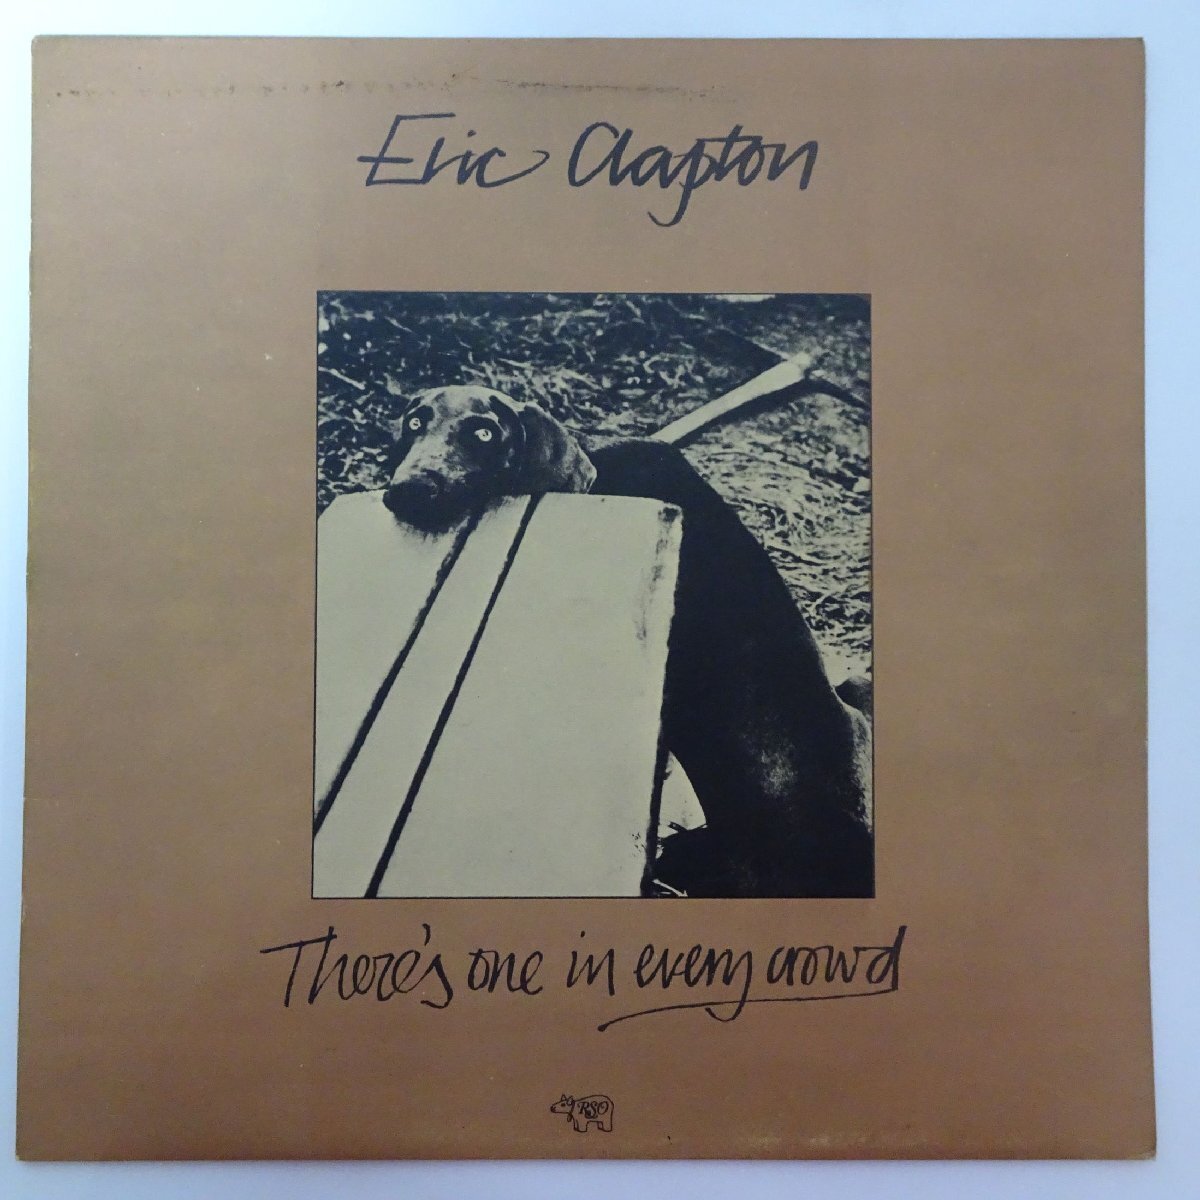 10025418;【UK盤】Eric Clapton / There's One In Every Crowd